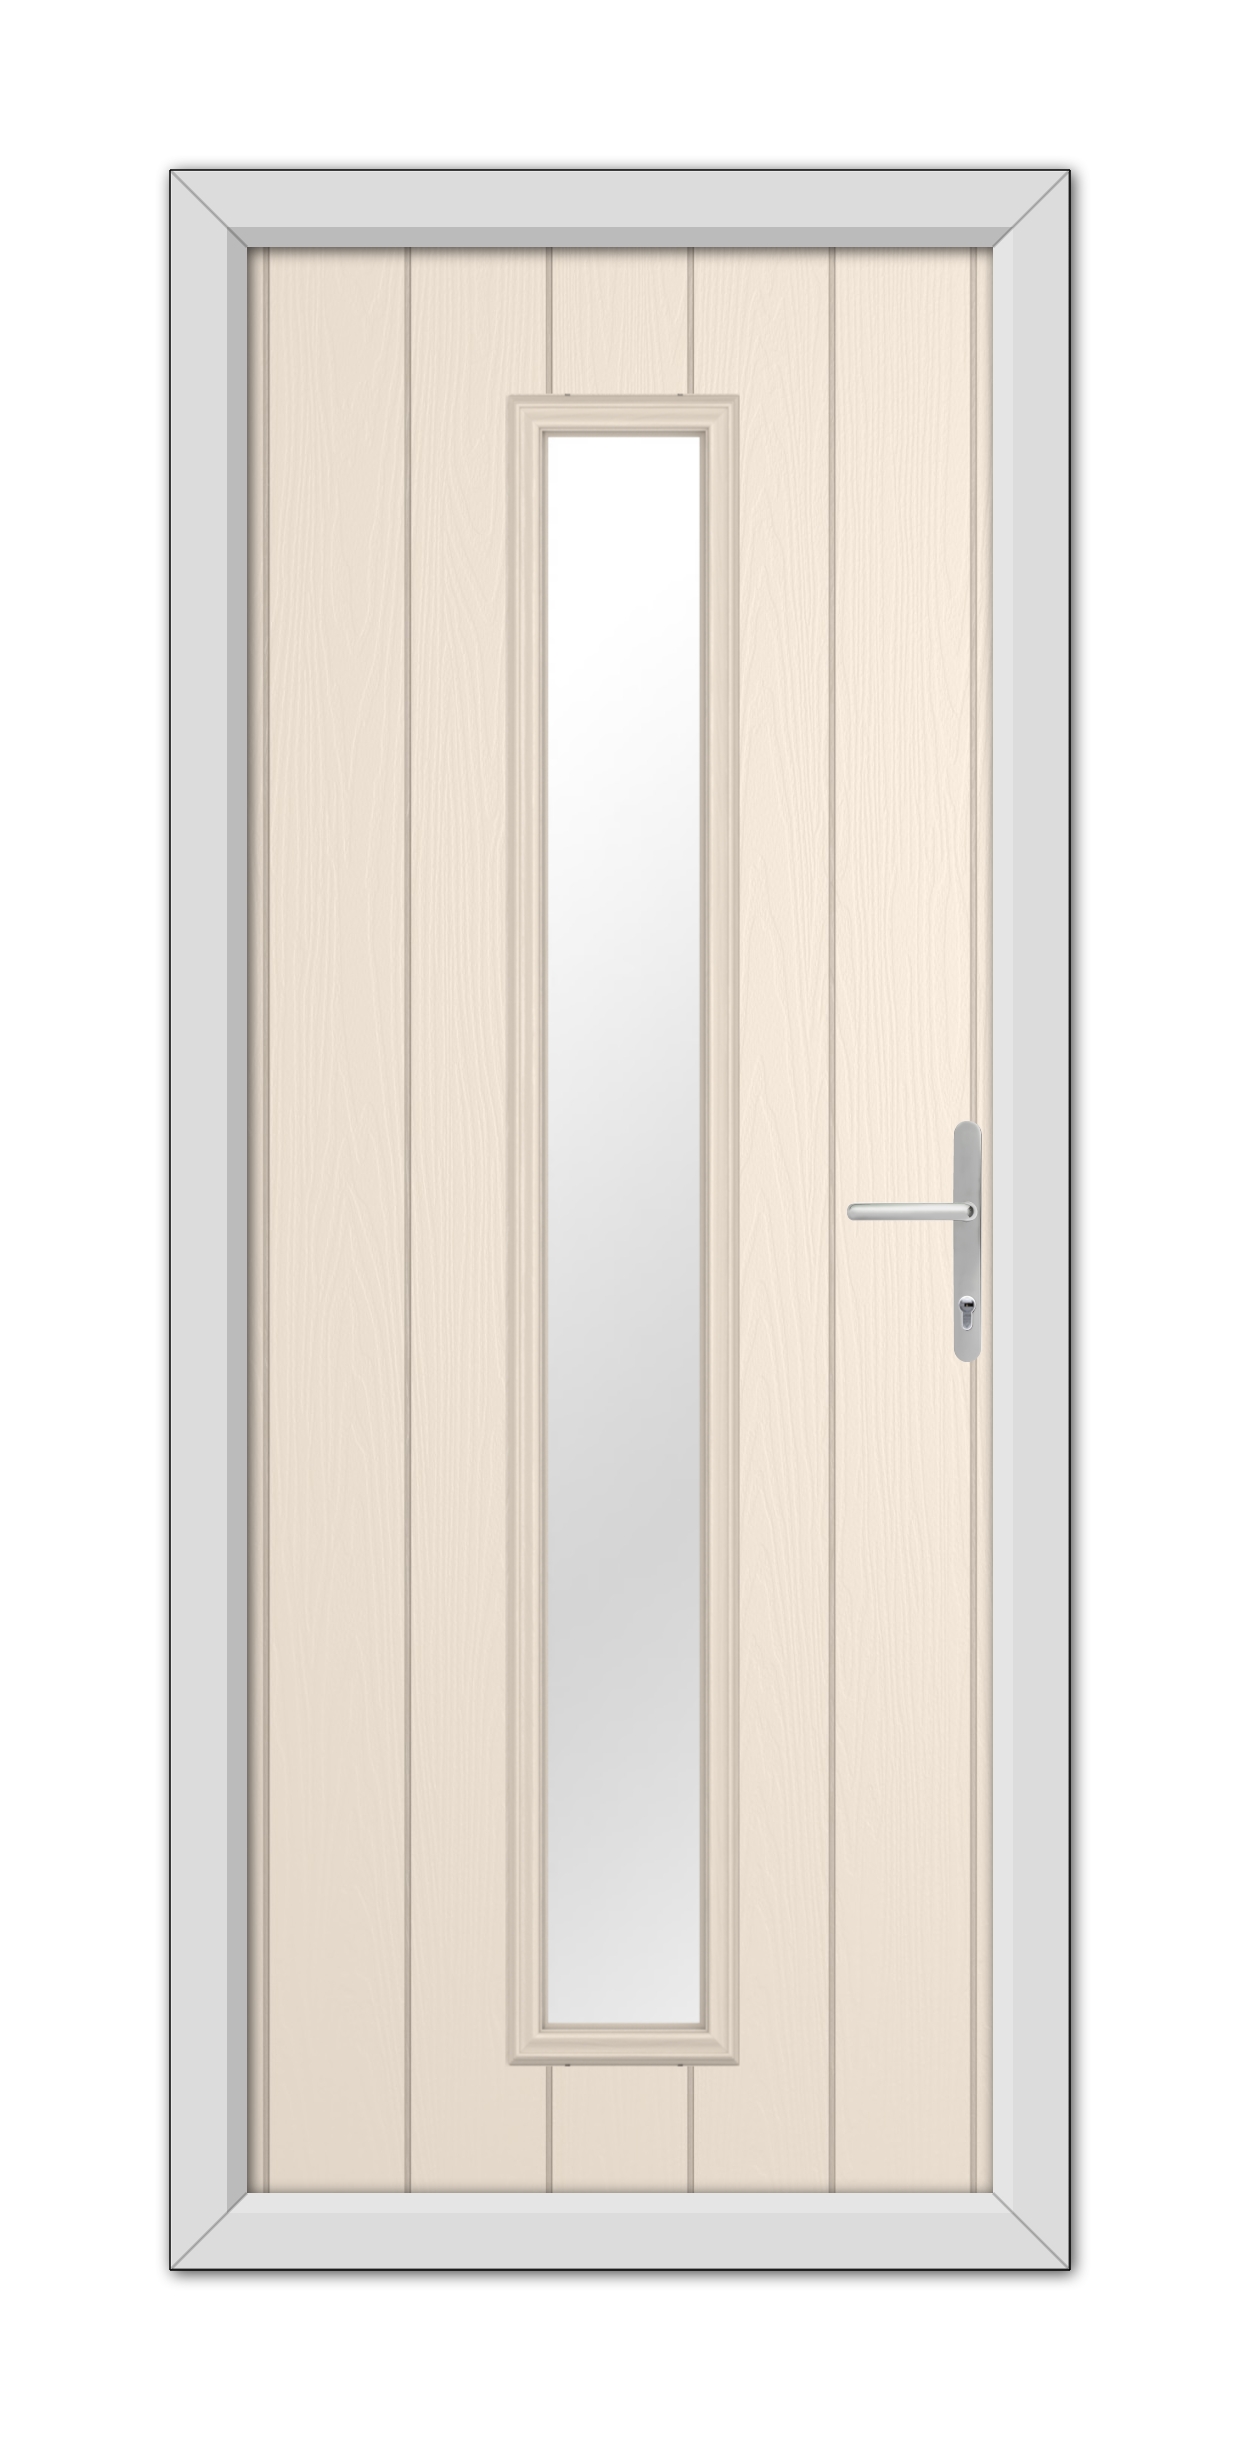 A modern Cream Rutland Composite Door 48mm Timber Core with a vertical glass panel and a metallic handle, set within a gray frame.